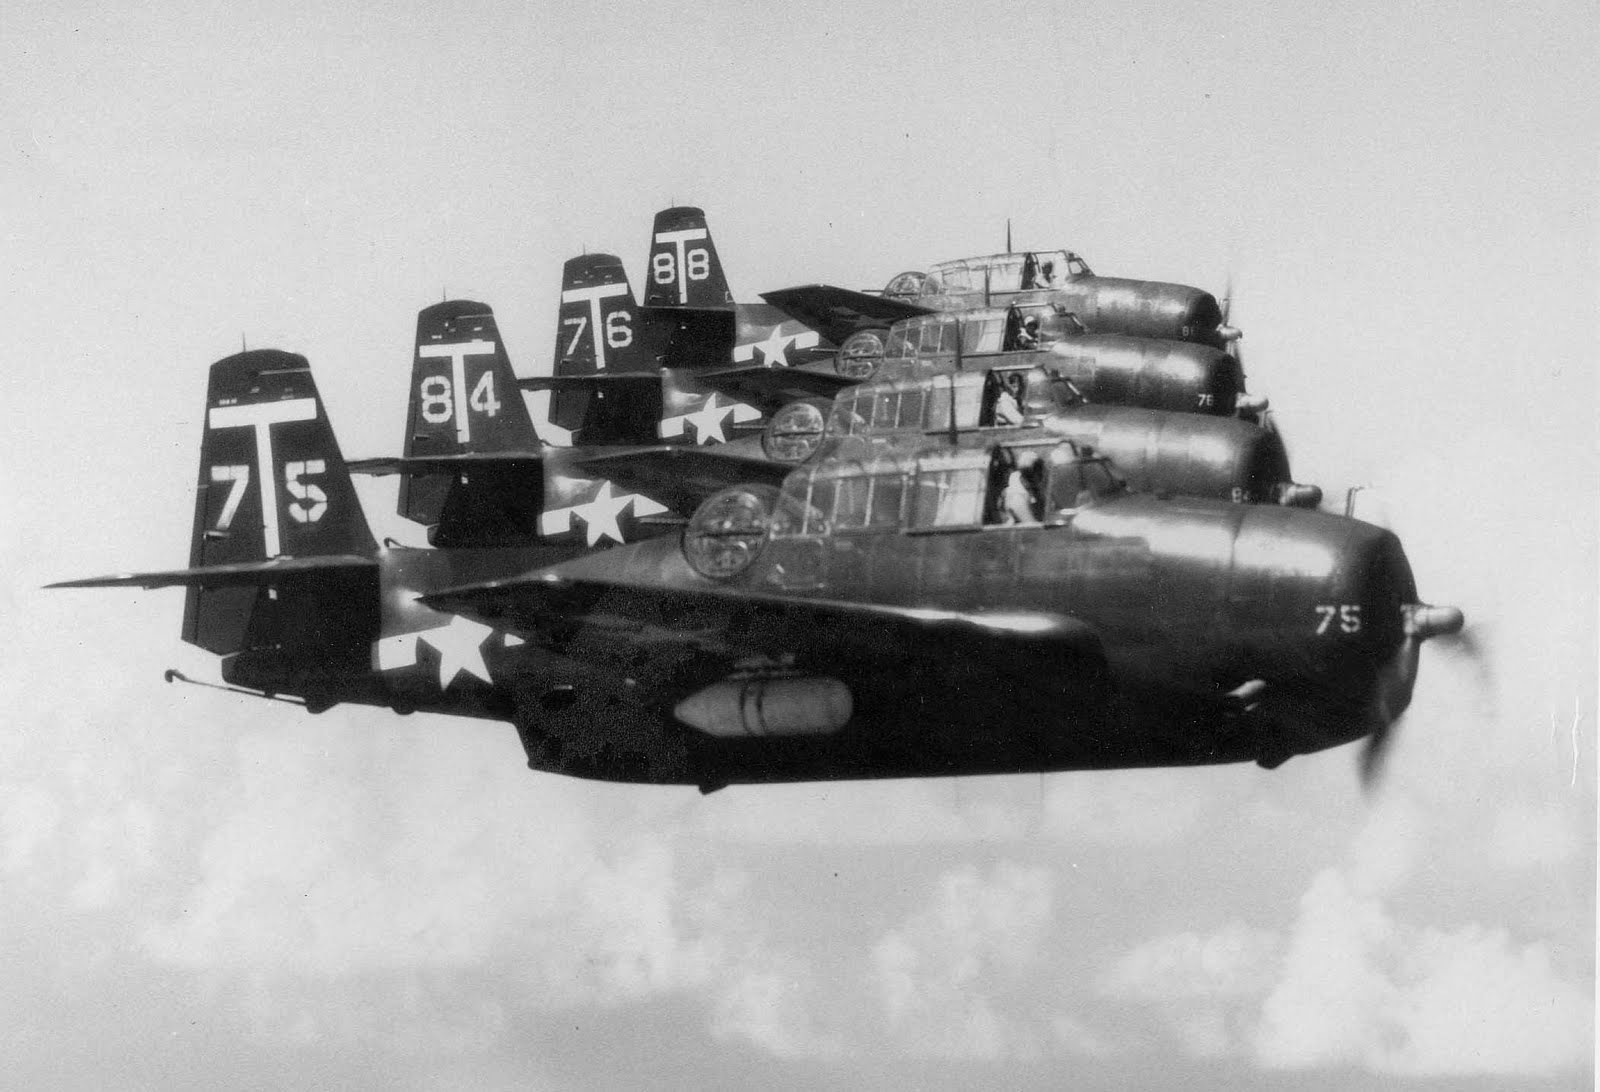 Experienced Avenger pilots of Attack Squadron VA-2A flying from USS Tarawa hold their TBM-3E’s in close formation above San Diego, California, United States, 1946. The white canister under the right wing is a radar pod